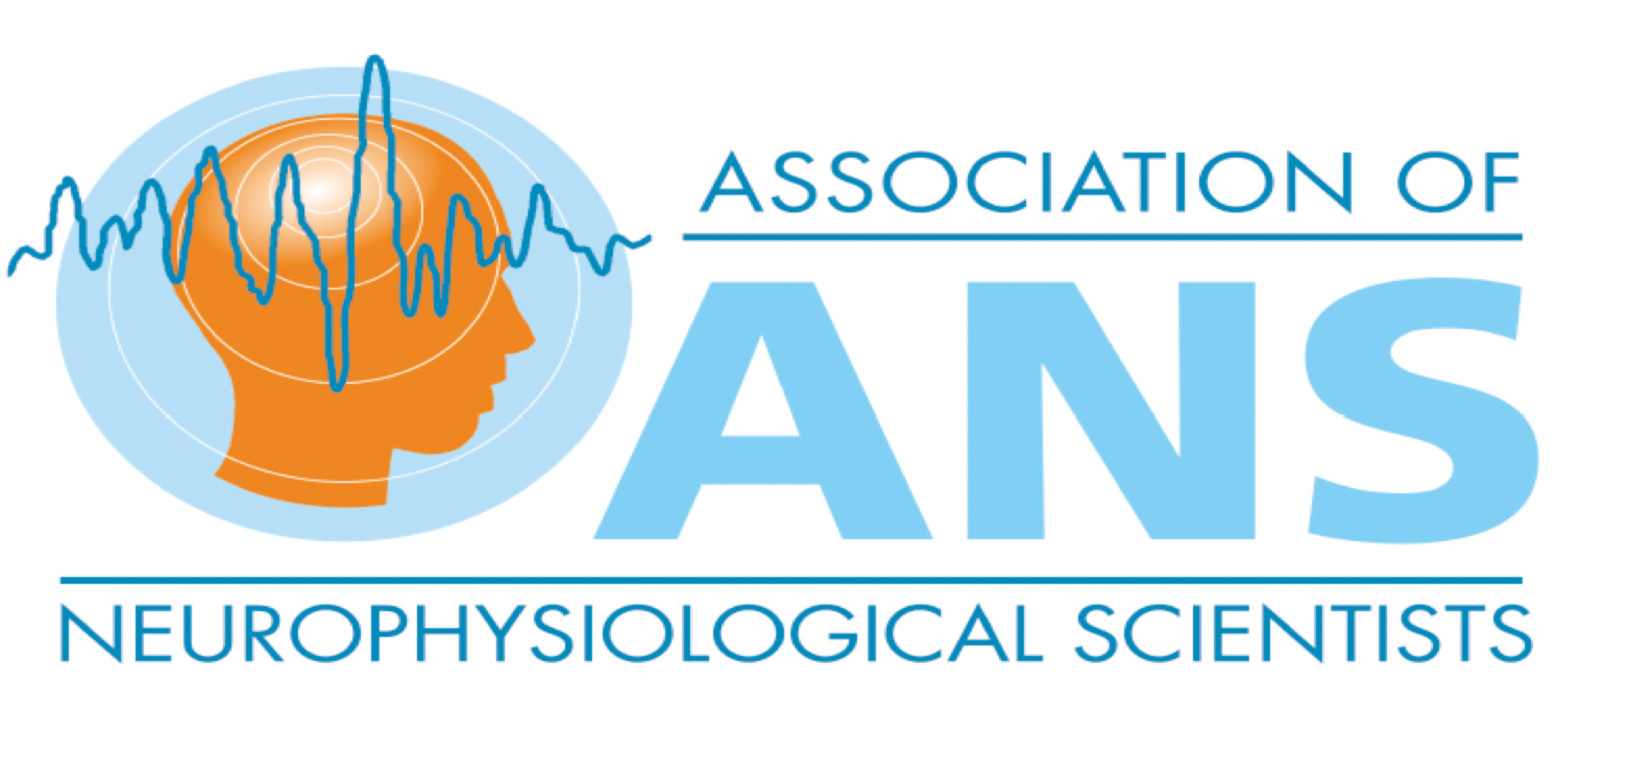 Association of Neurophysiological Scientists